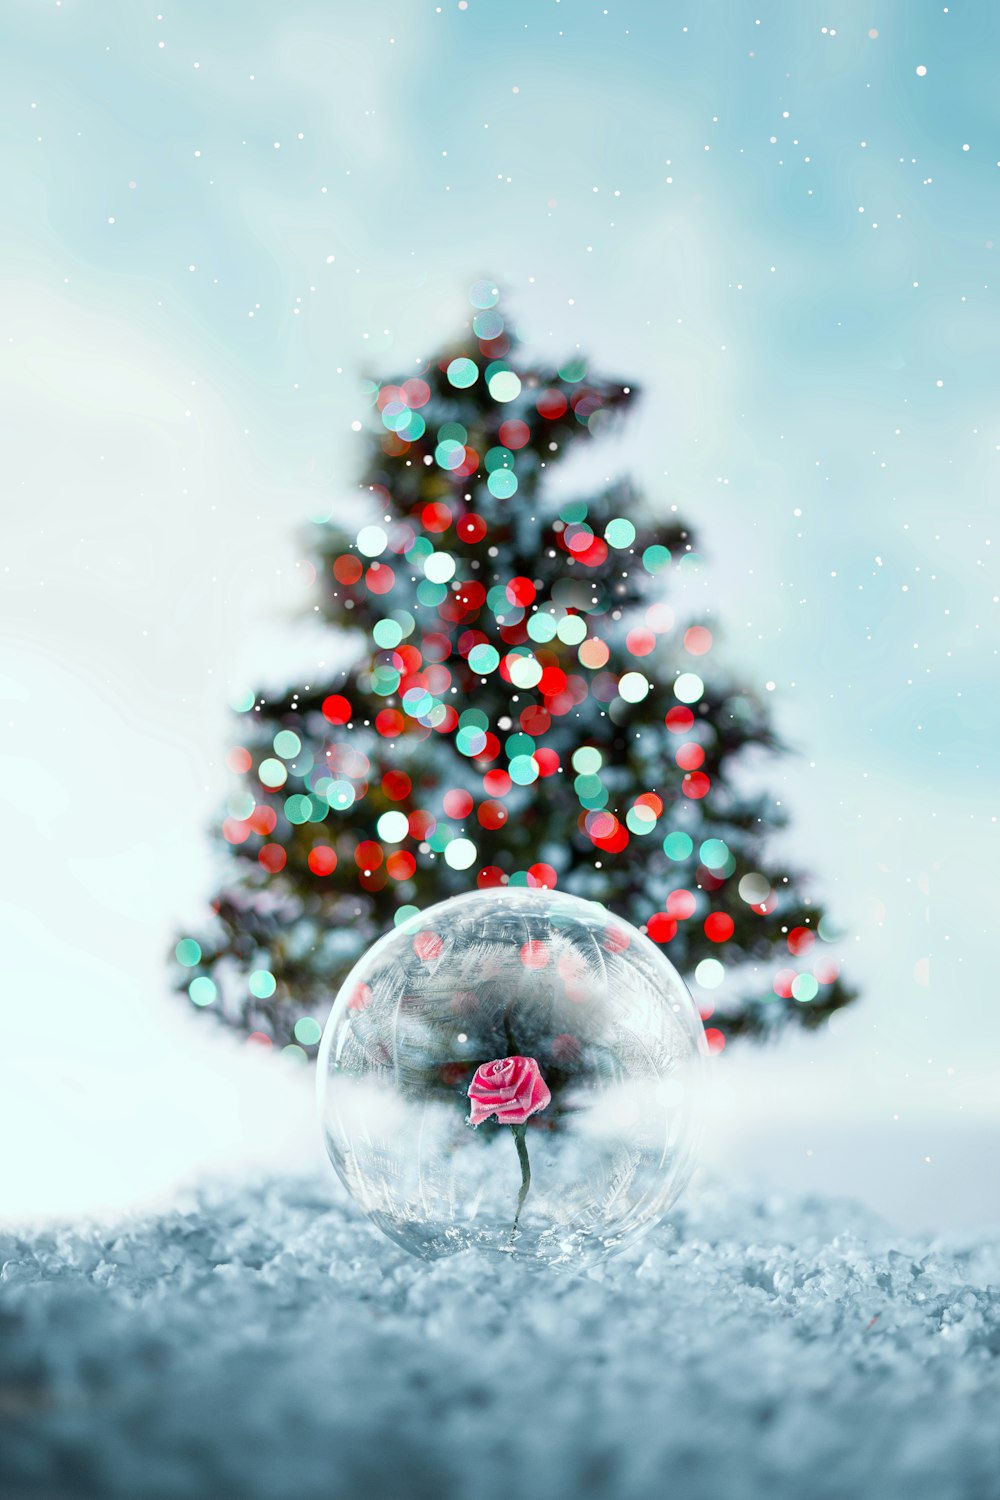 a snow globe with a red rose in it